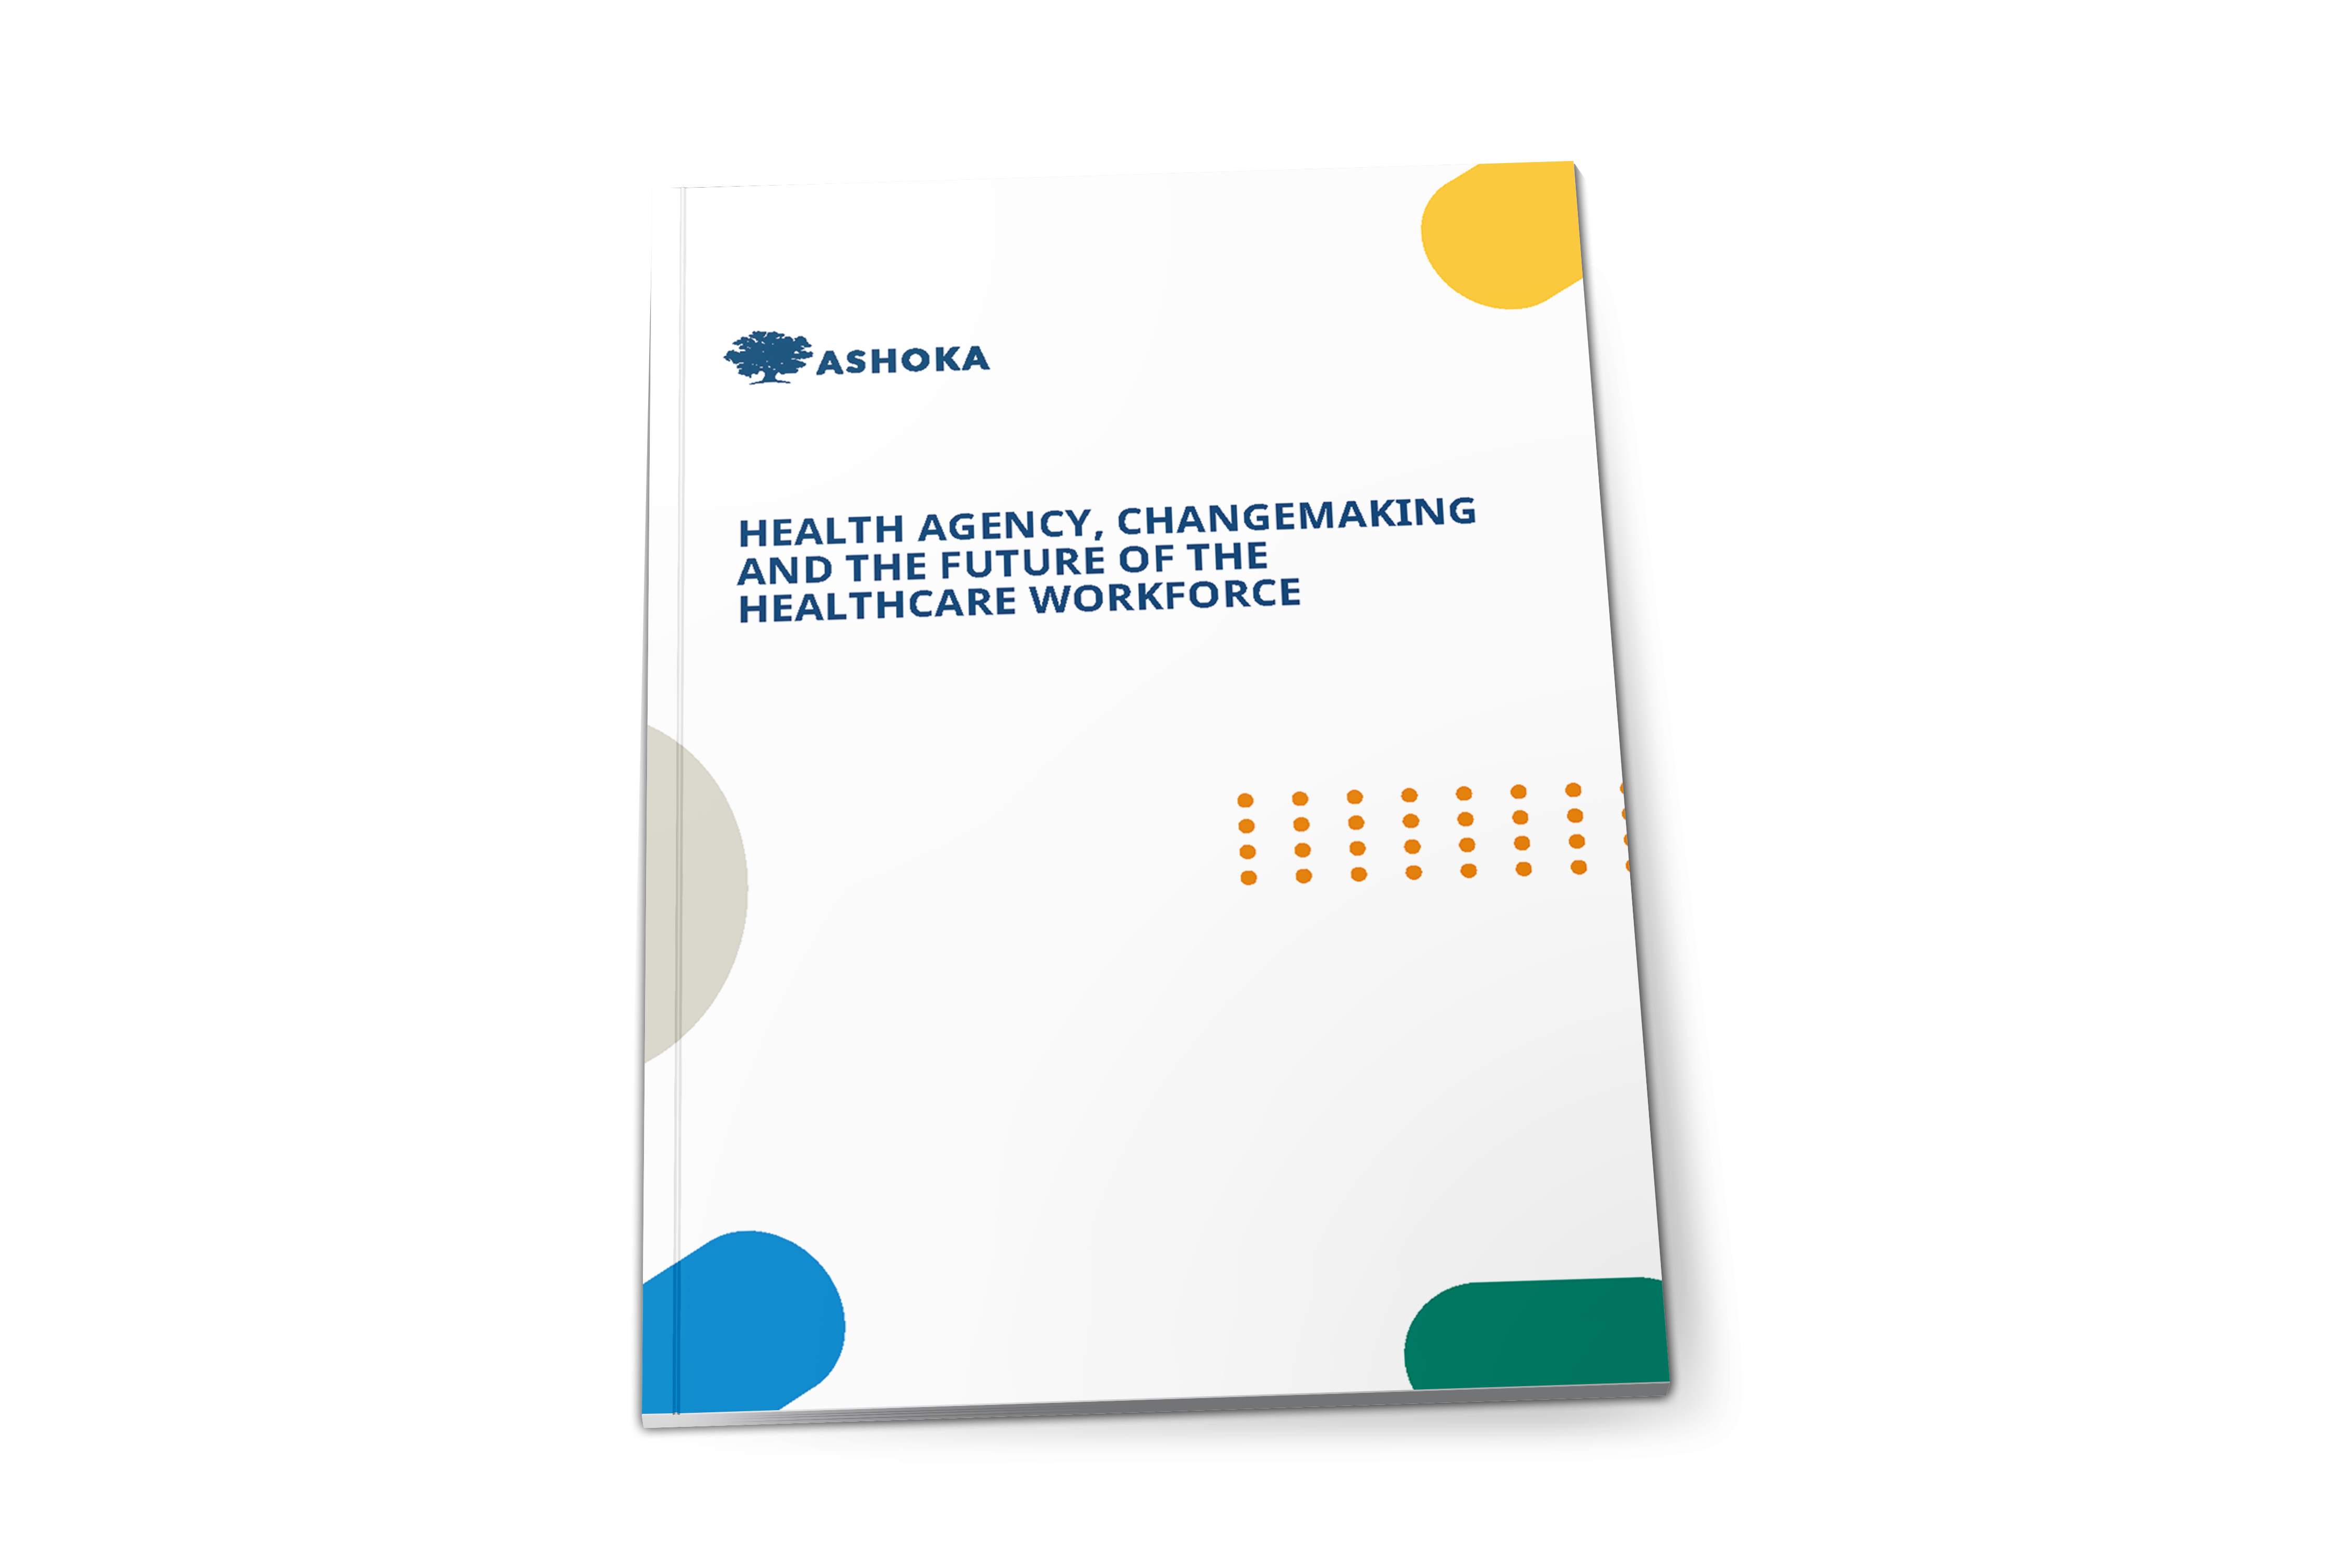 HEALTH AGENCY, CHANGEMAKING AND THE FUTURE OF THE HEALTHCARE WORKFORCE